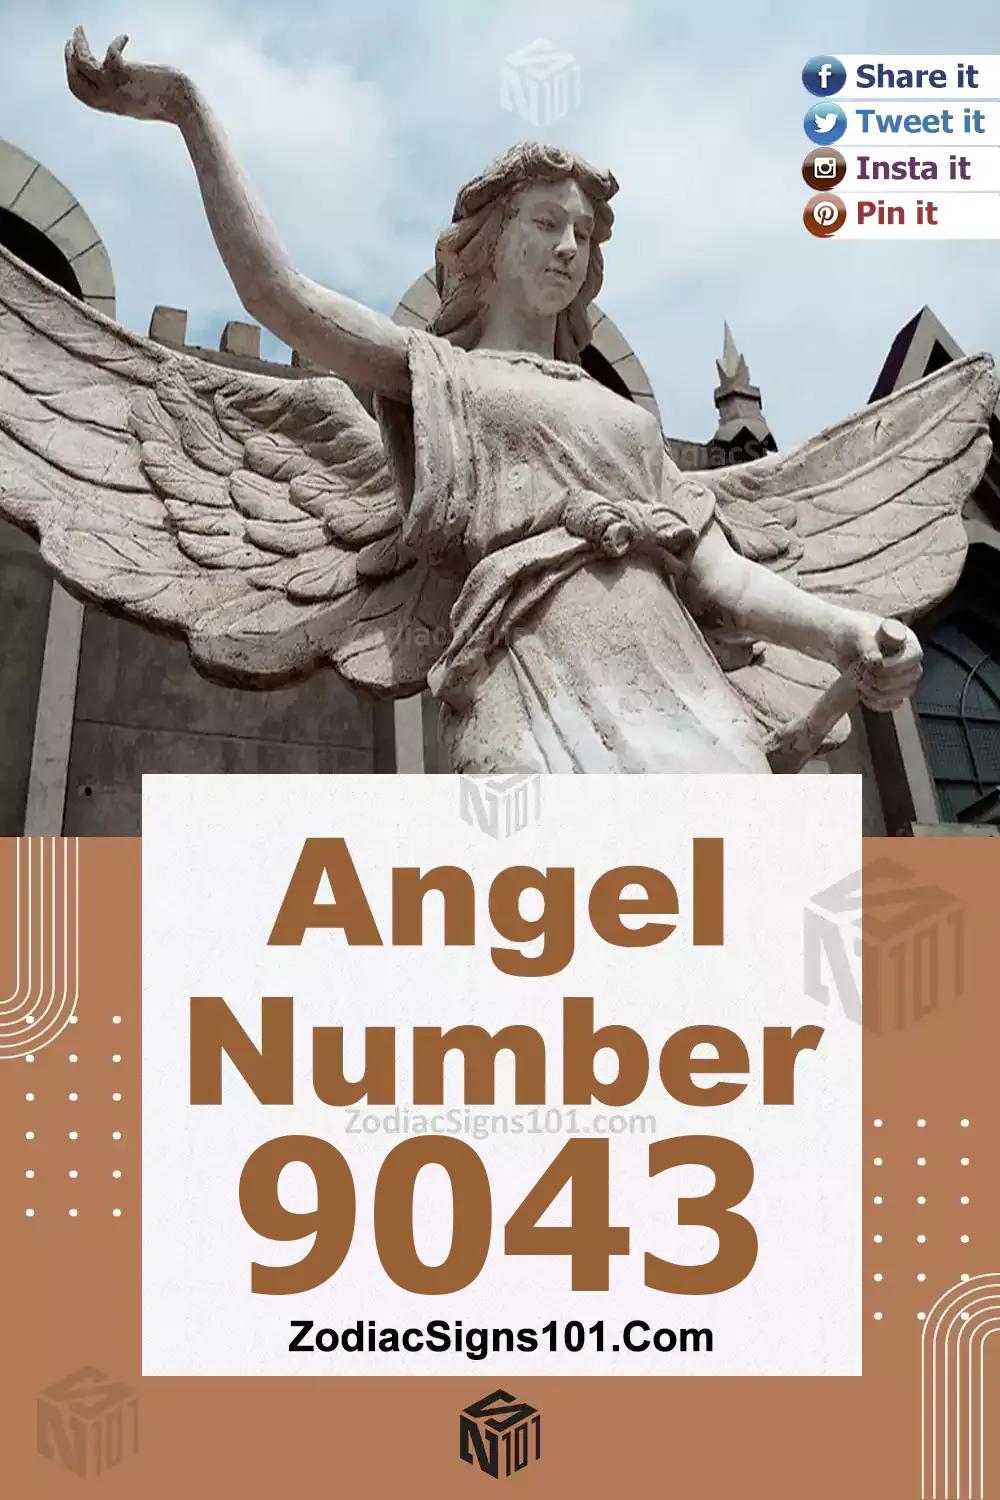 9043 Angel Number Meaning